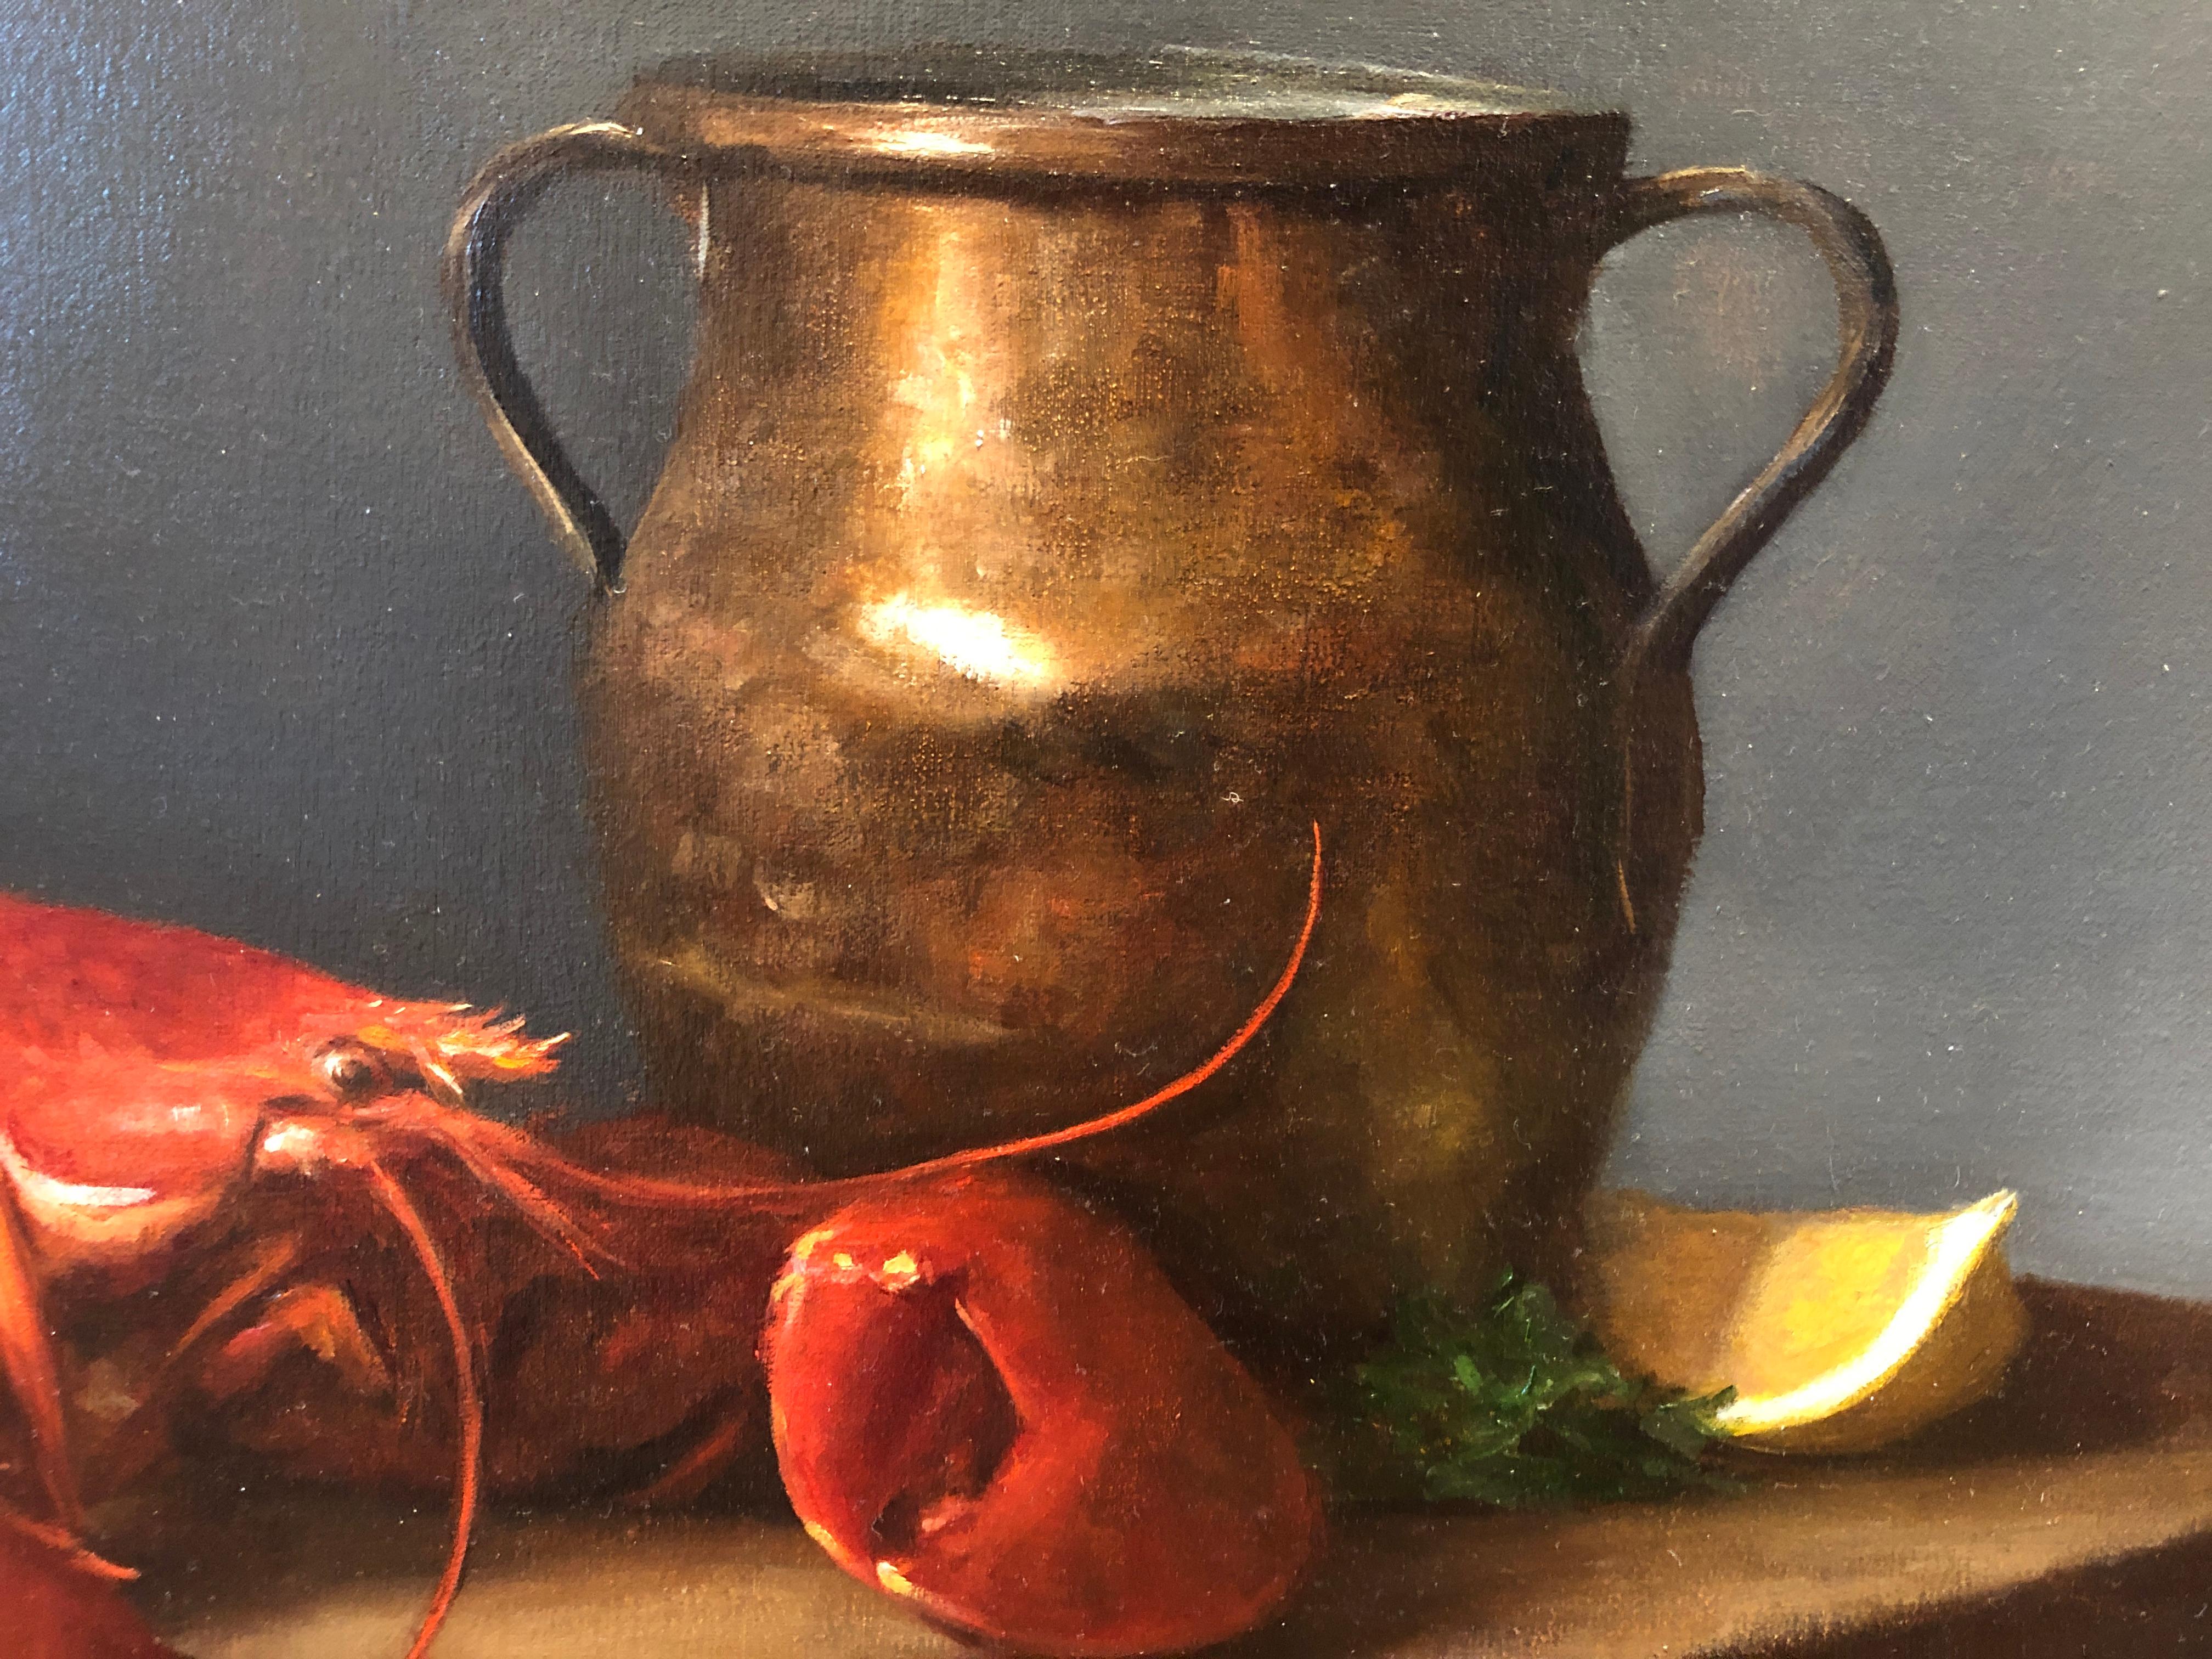 Lobster and Copper Pot - American Realist Painting by Sarah Lamb